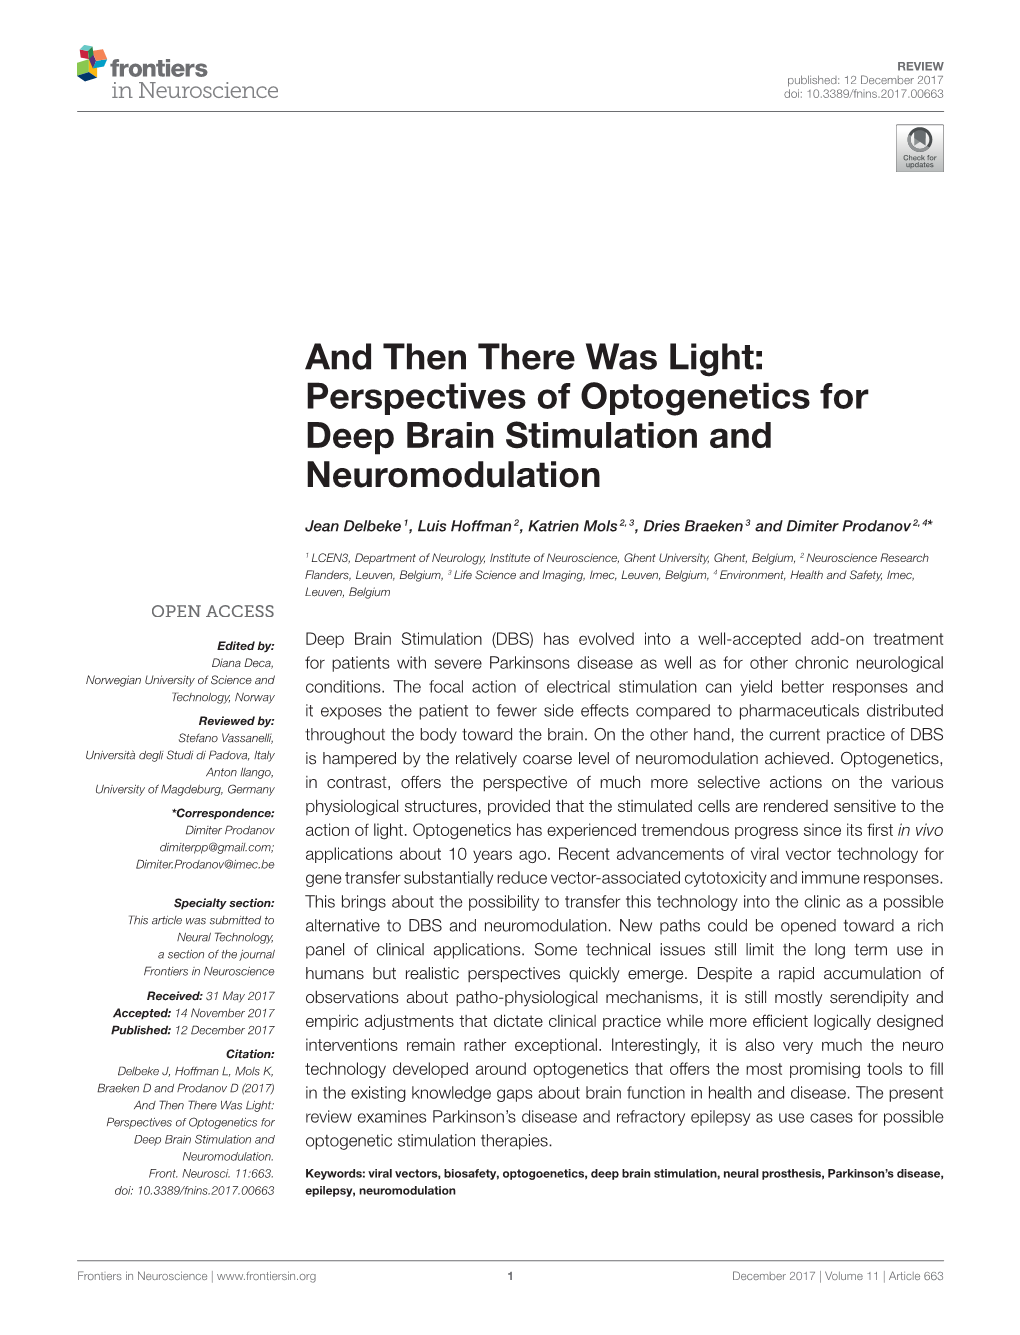 Perspectives of Optogenetics for Deep Brain Stimulation and Neuromodulation